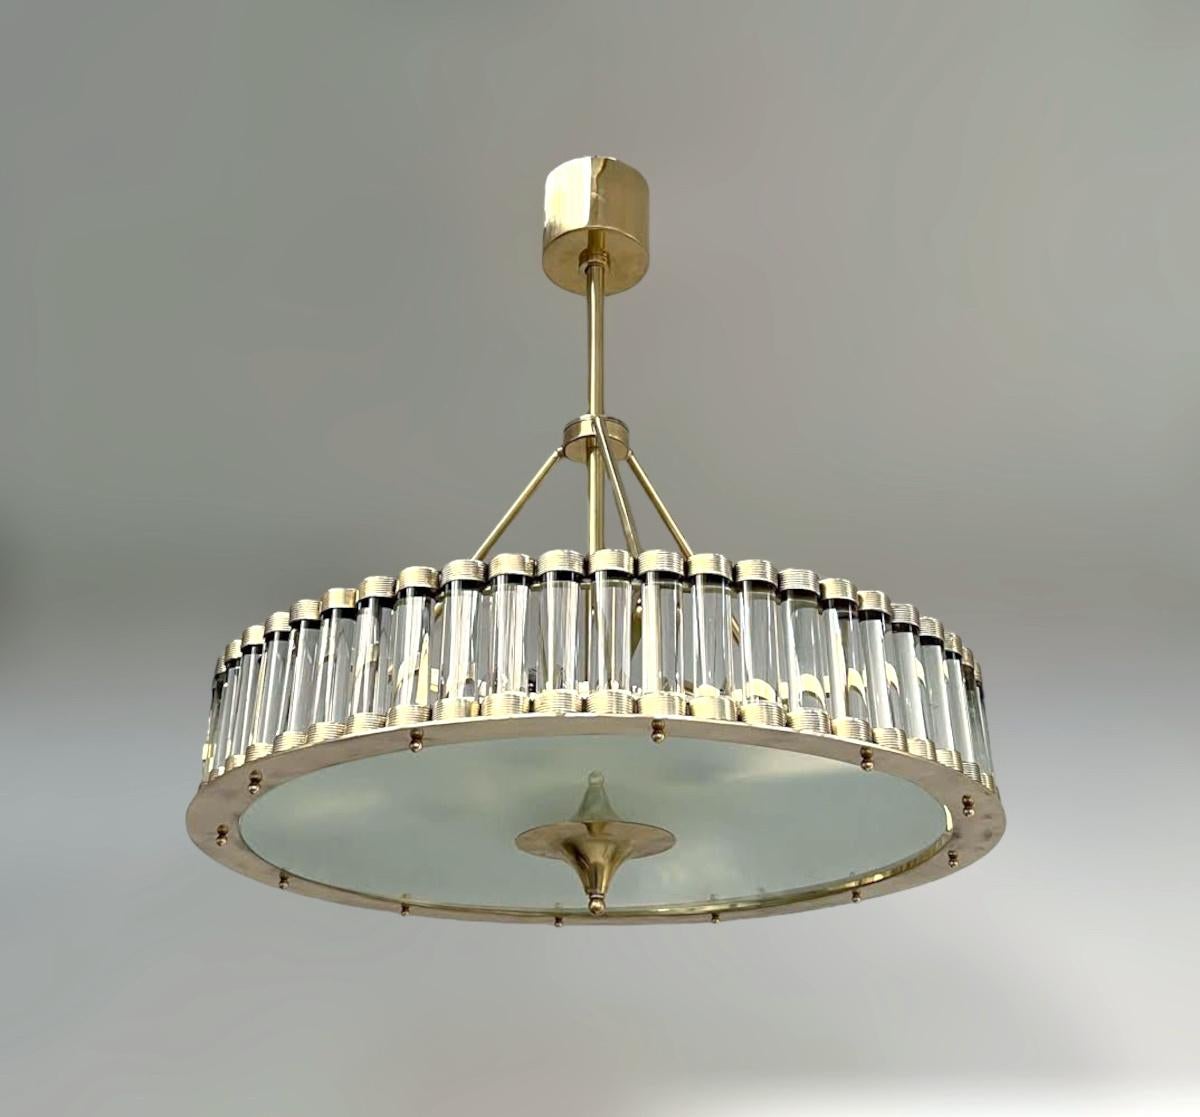 Italian art deco style drum chandelier with clear Murano glass rods mounted on solid brass frame in unlacquered natural brass finish / Made in Italy
6 lights / E26 or E27 type / max 60W each
Measures: diameter 27.5 inches, height 30 inches including